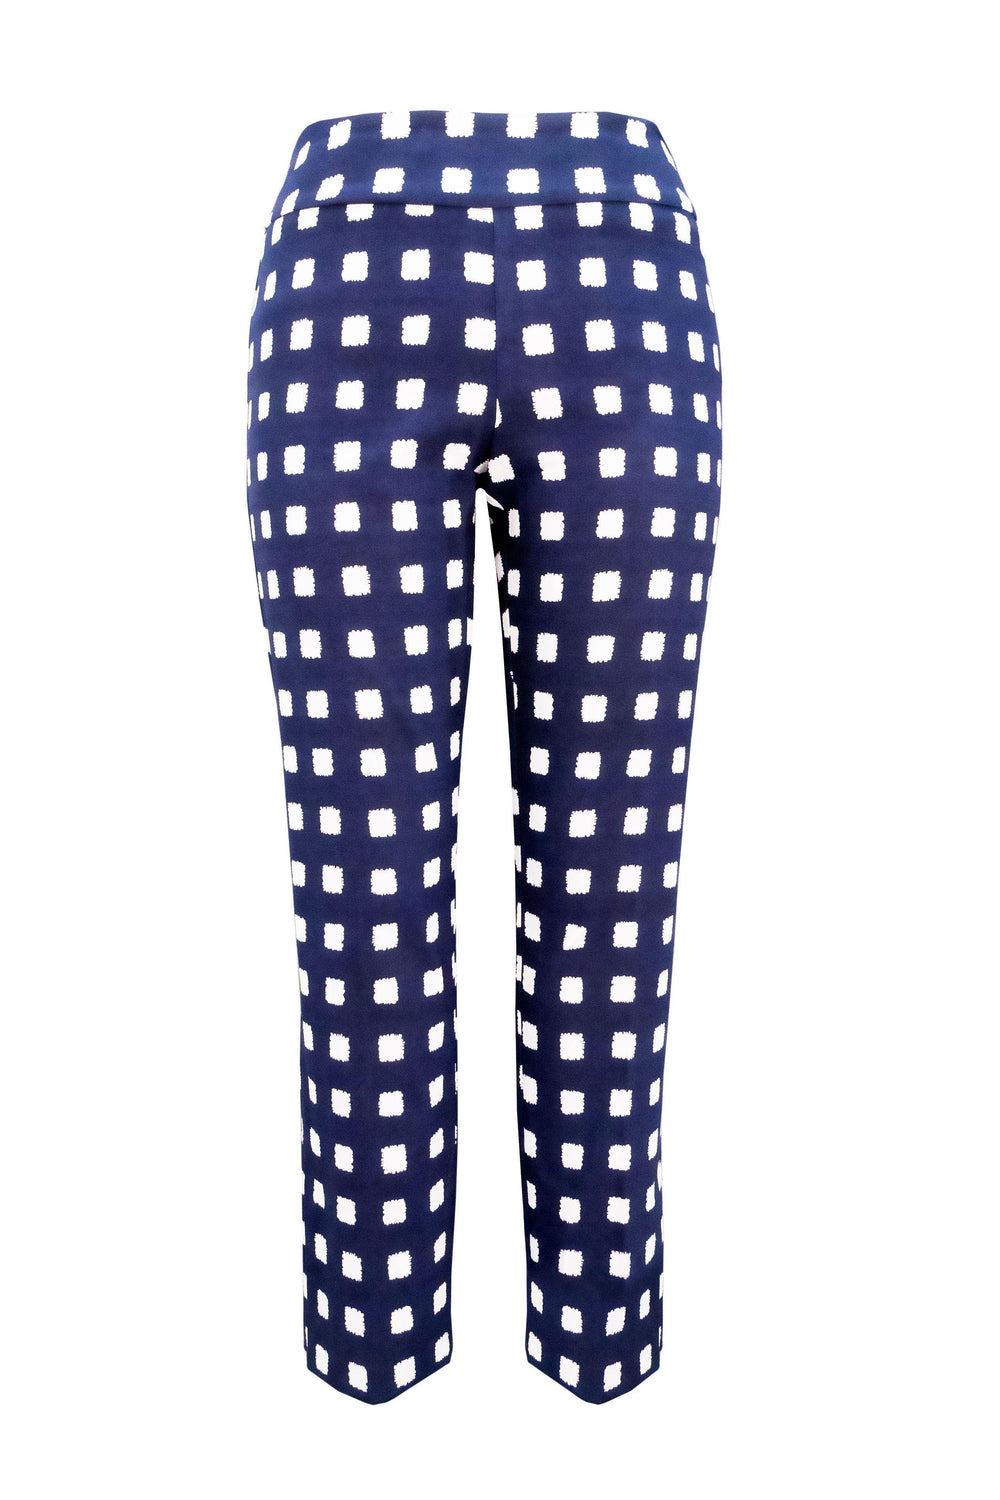 Navy Cubed Up! Pants - Tres Chic Houston